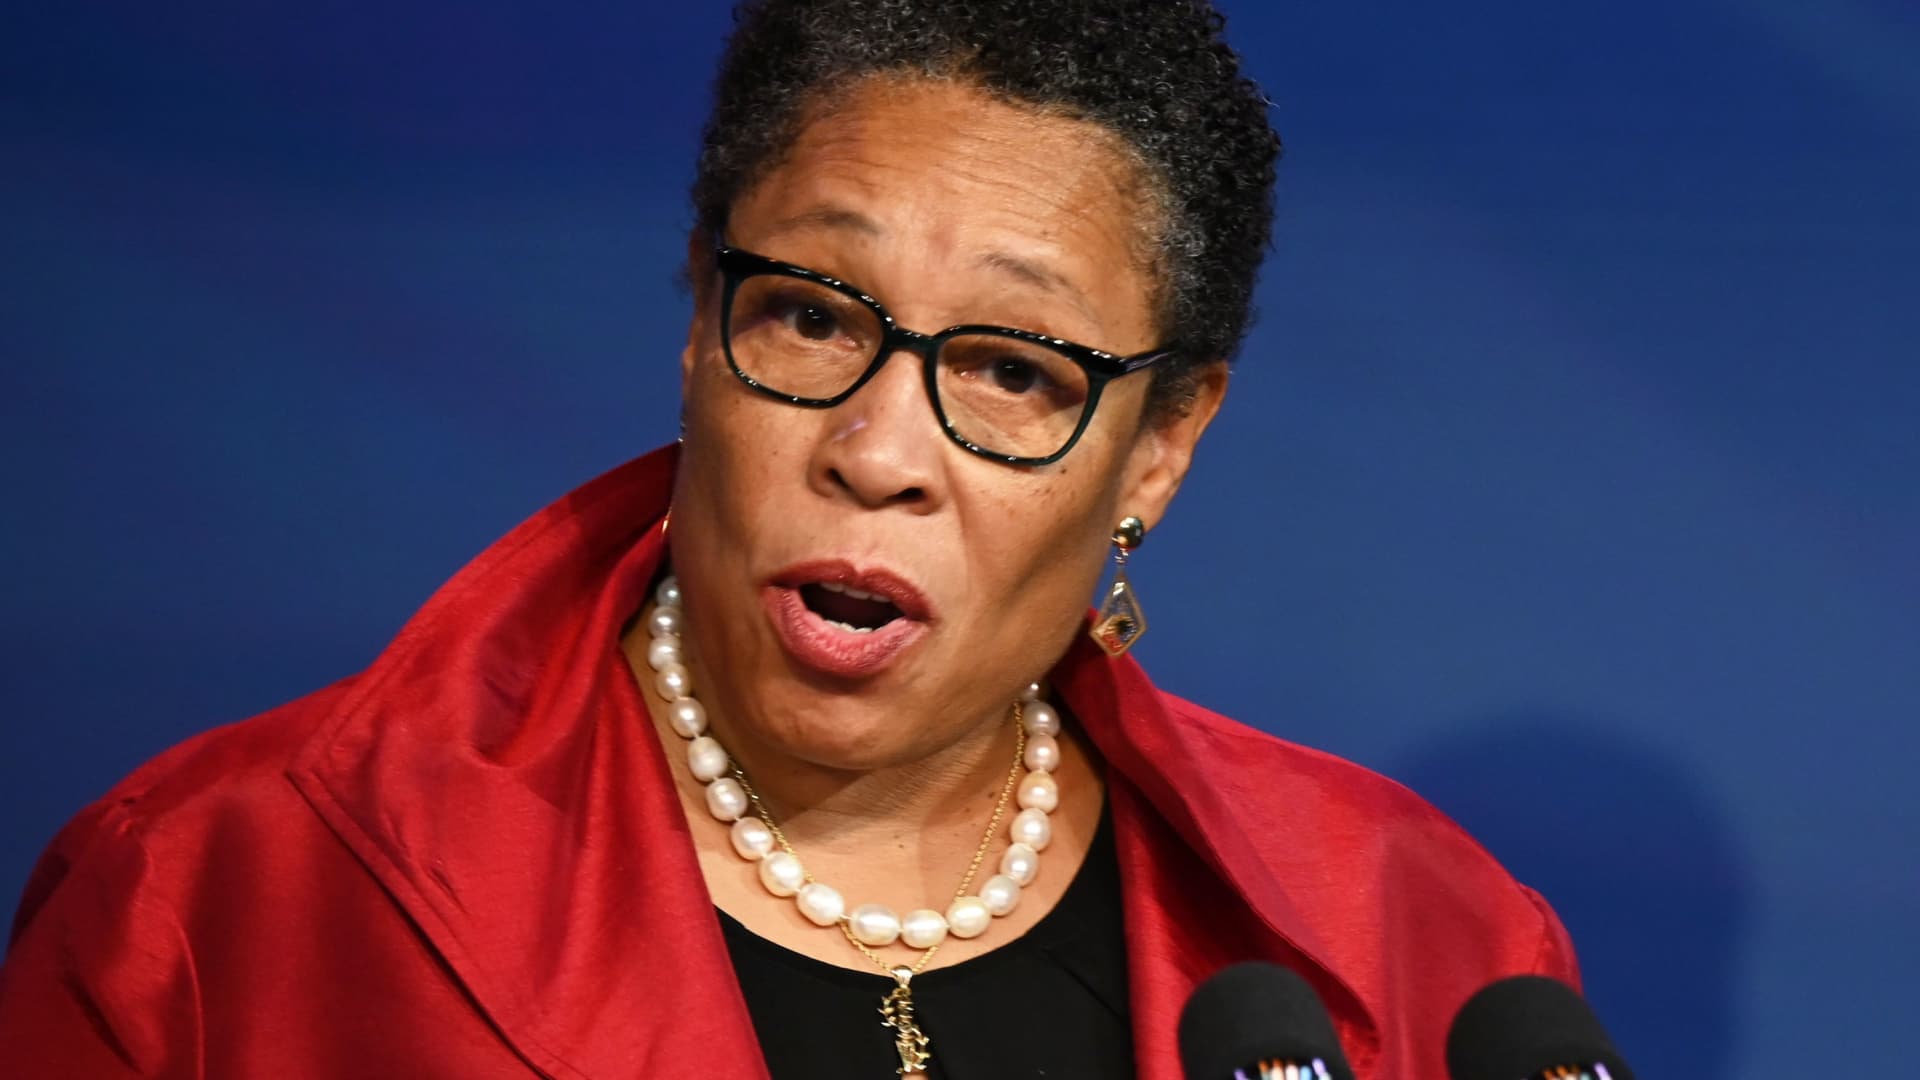 US Representative Marcia Fudge speaks on December 11, 2020, after being nominated to be Housing and Urban Development Secretary by US President-elect Joe Biden (R), in Wilmington, Delaware.